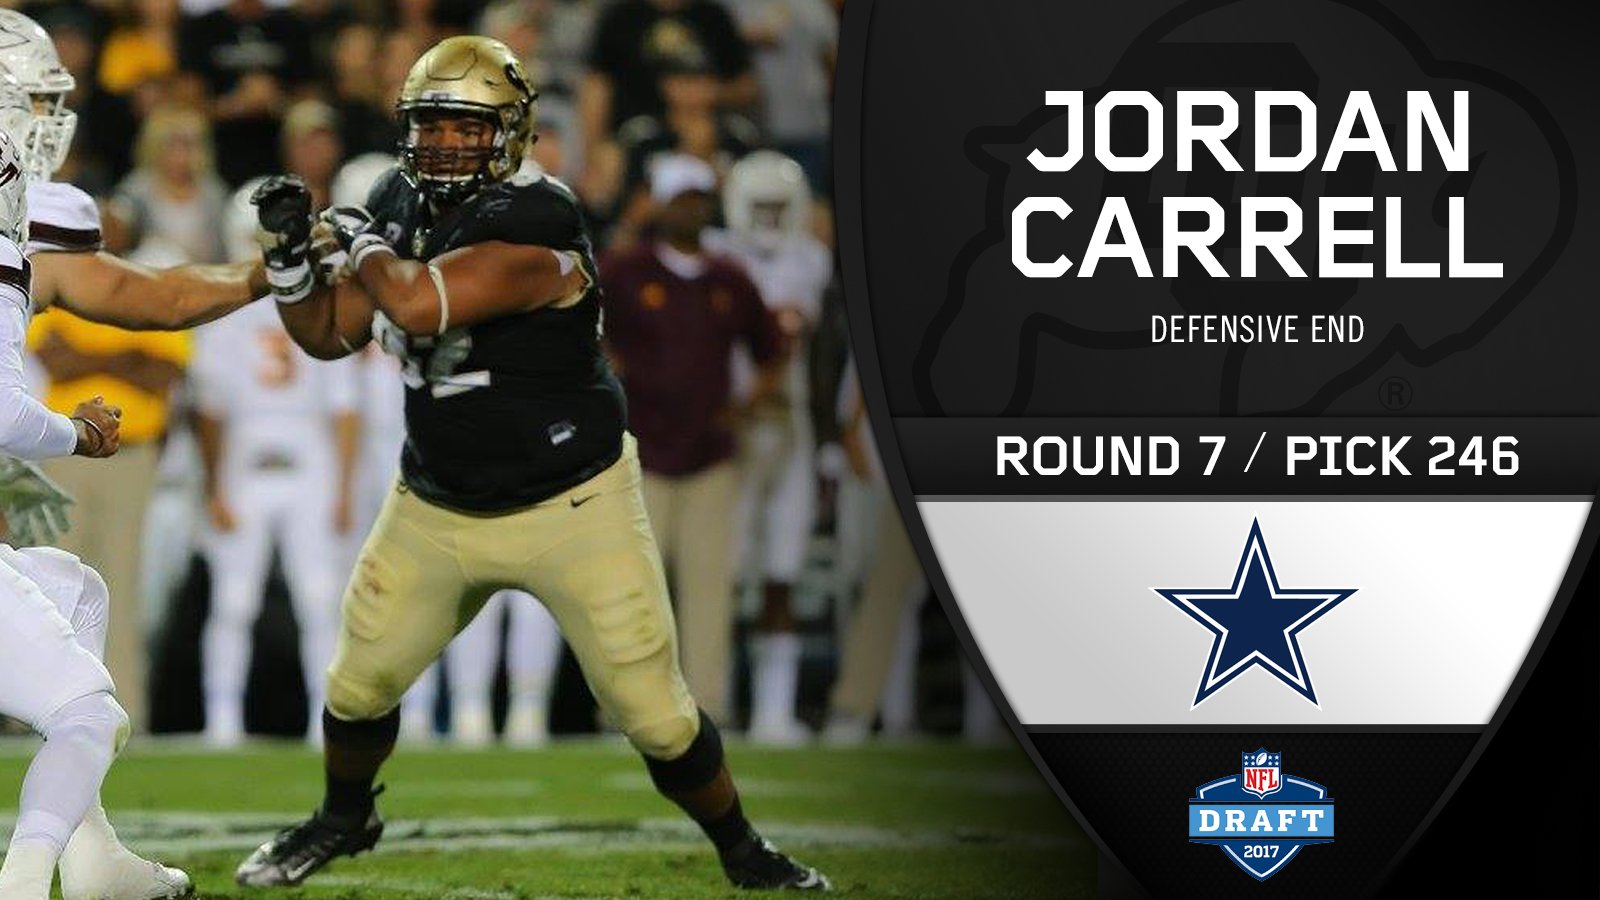 Network on Twitter: "The rise for Jordan Carrell. This Buff is going to the @dallascowboys! #NFLDraft https://t.co/F9rXy8v99d" Twitter